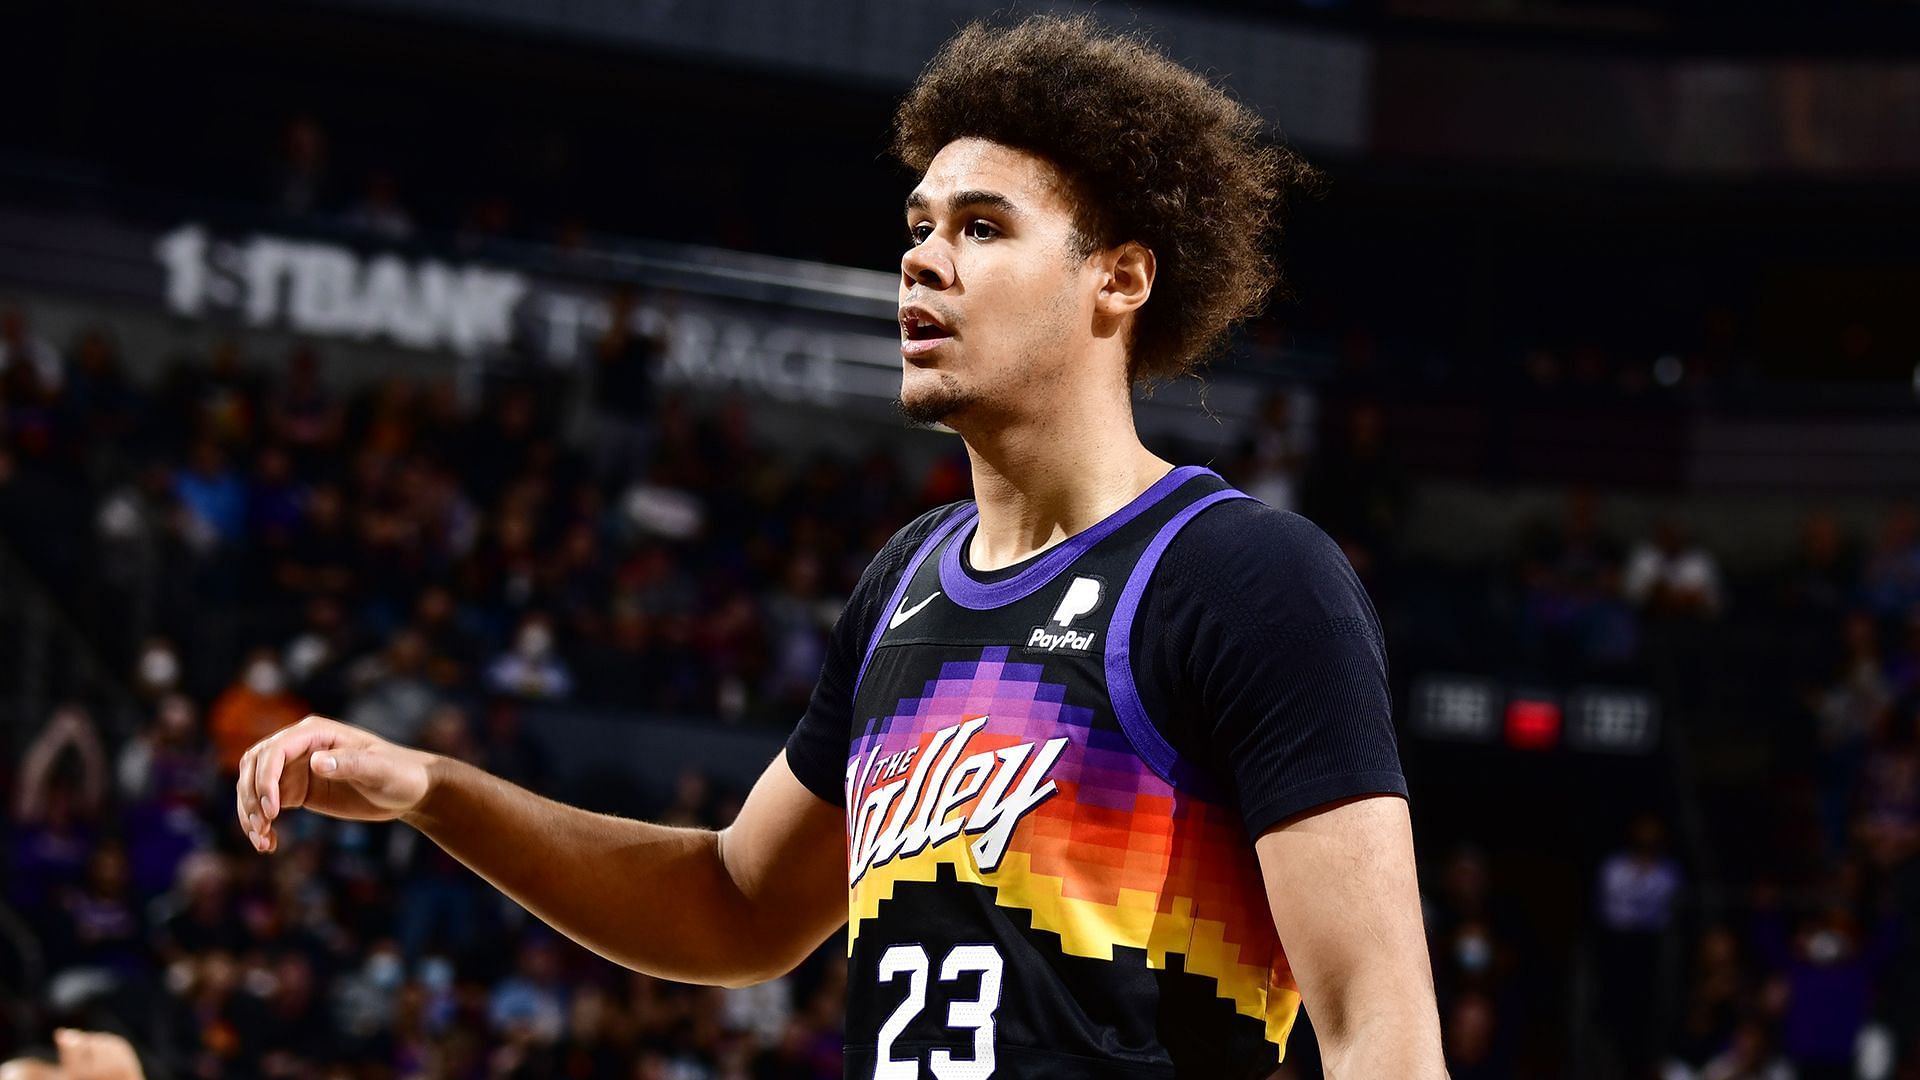 Cameron Johnson could get a rookie contract extension from the Phoenix Suns. [Photo: NBA.com]